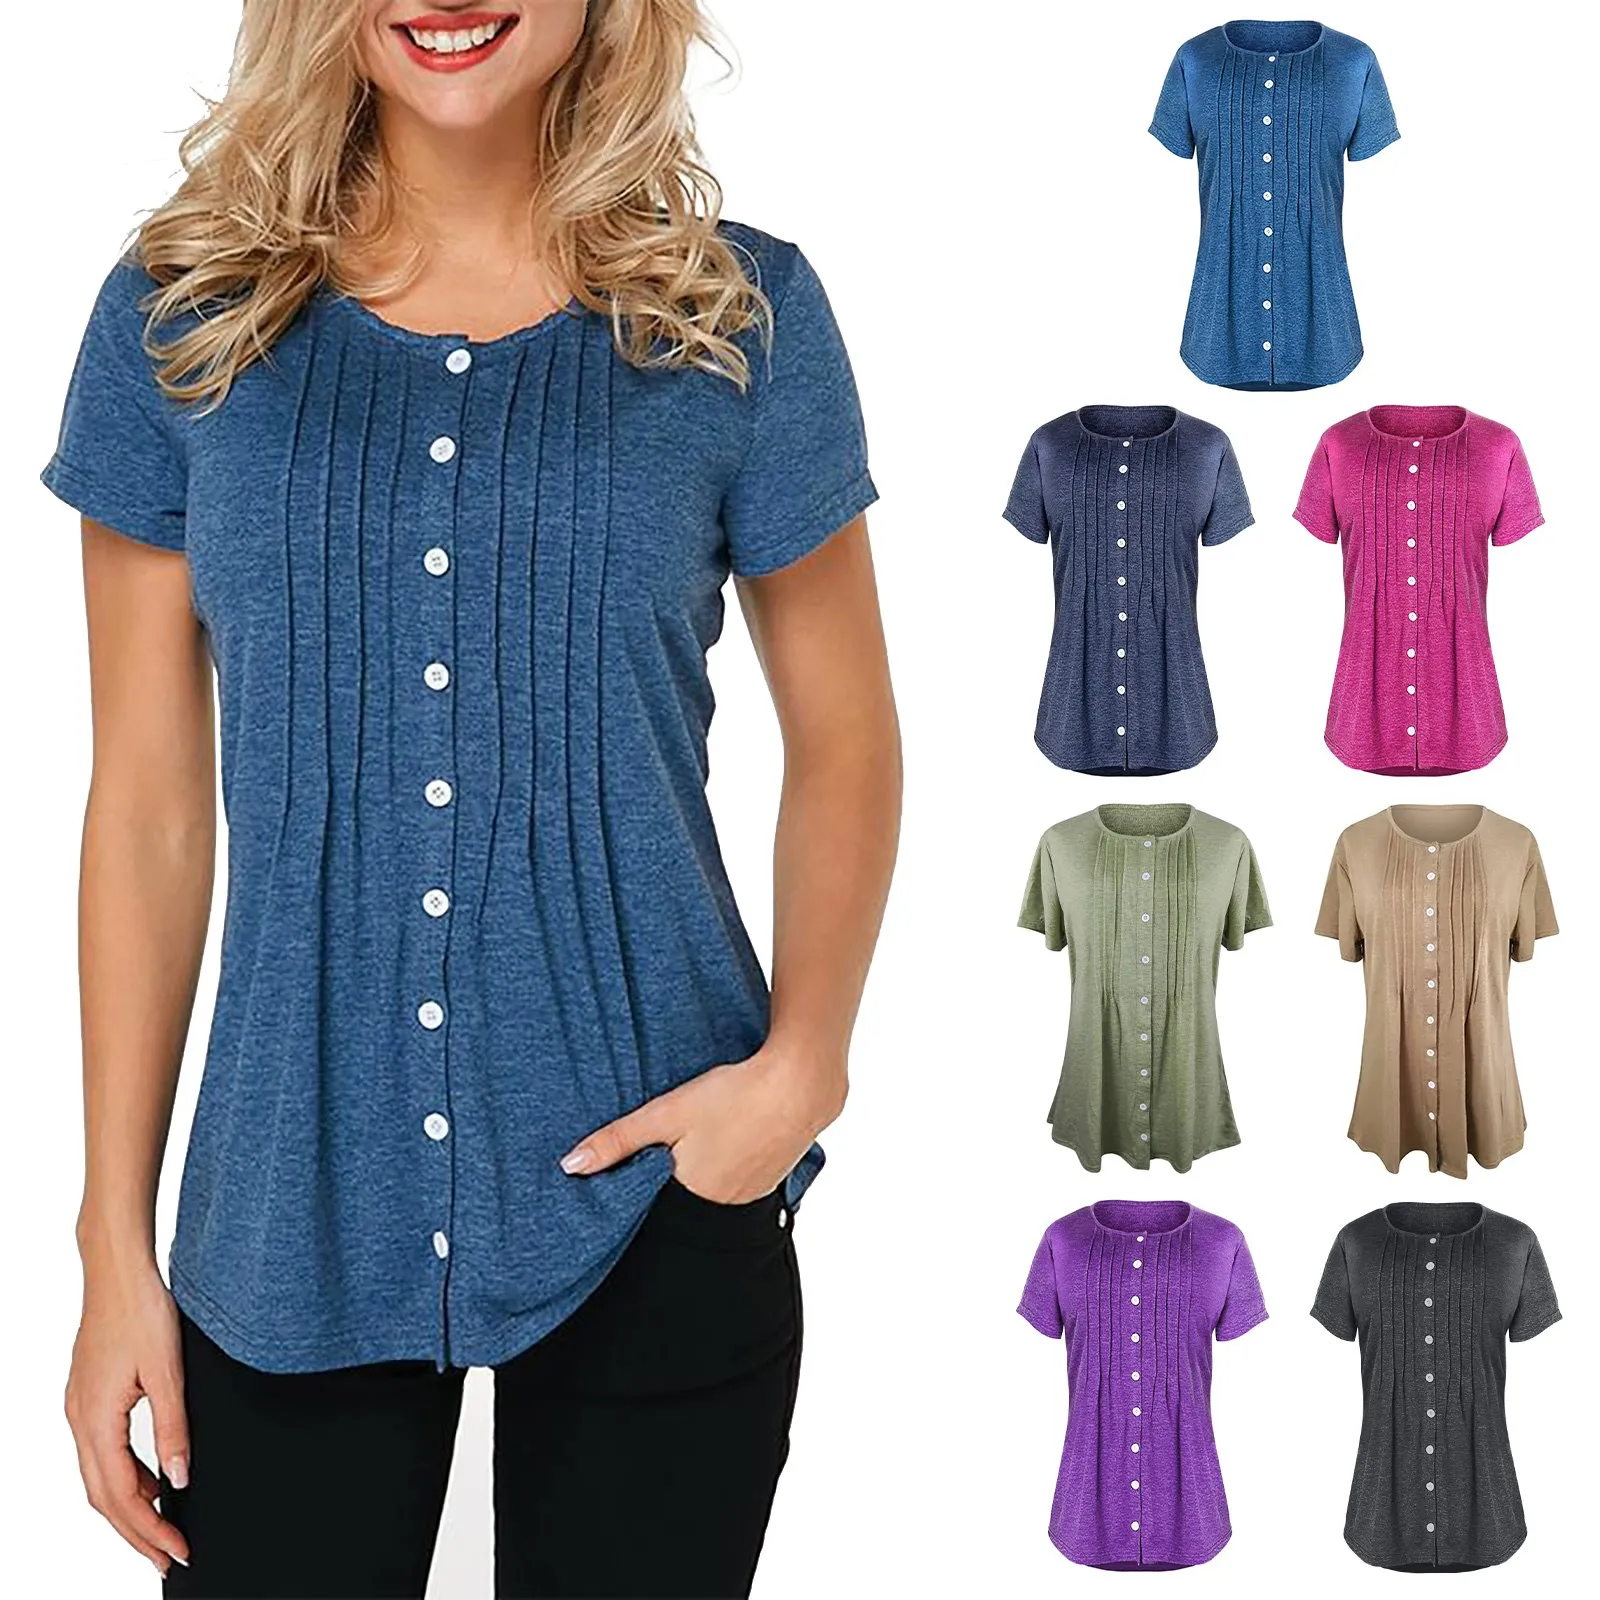 

Purple Button Pleated Tunic Tops Blusas Women Casual Short Sleeve Loose Blouse Female Pullover Cotton Tops Summer Blusa Camisa